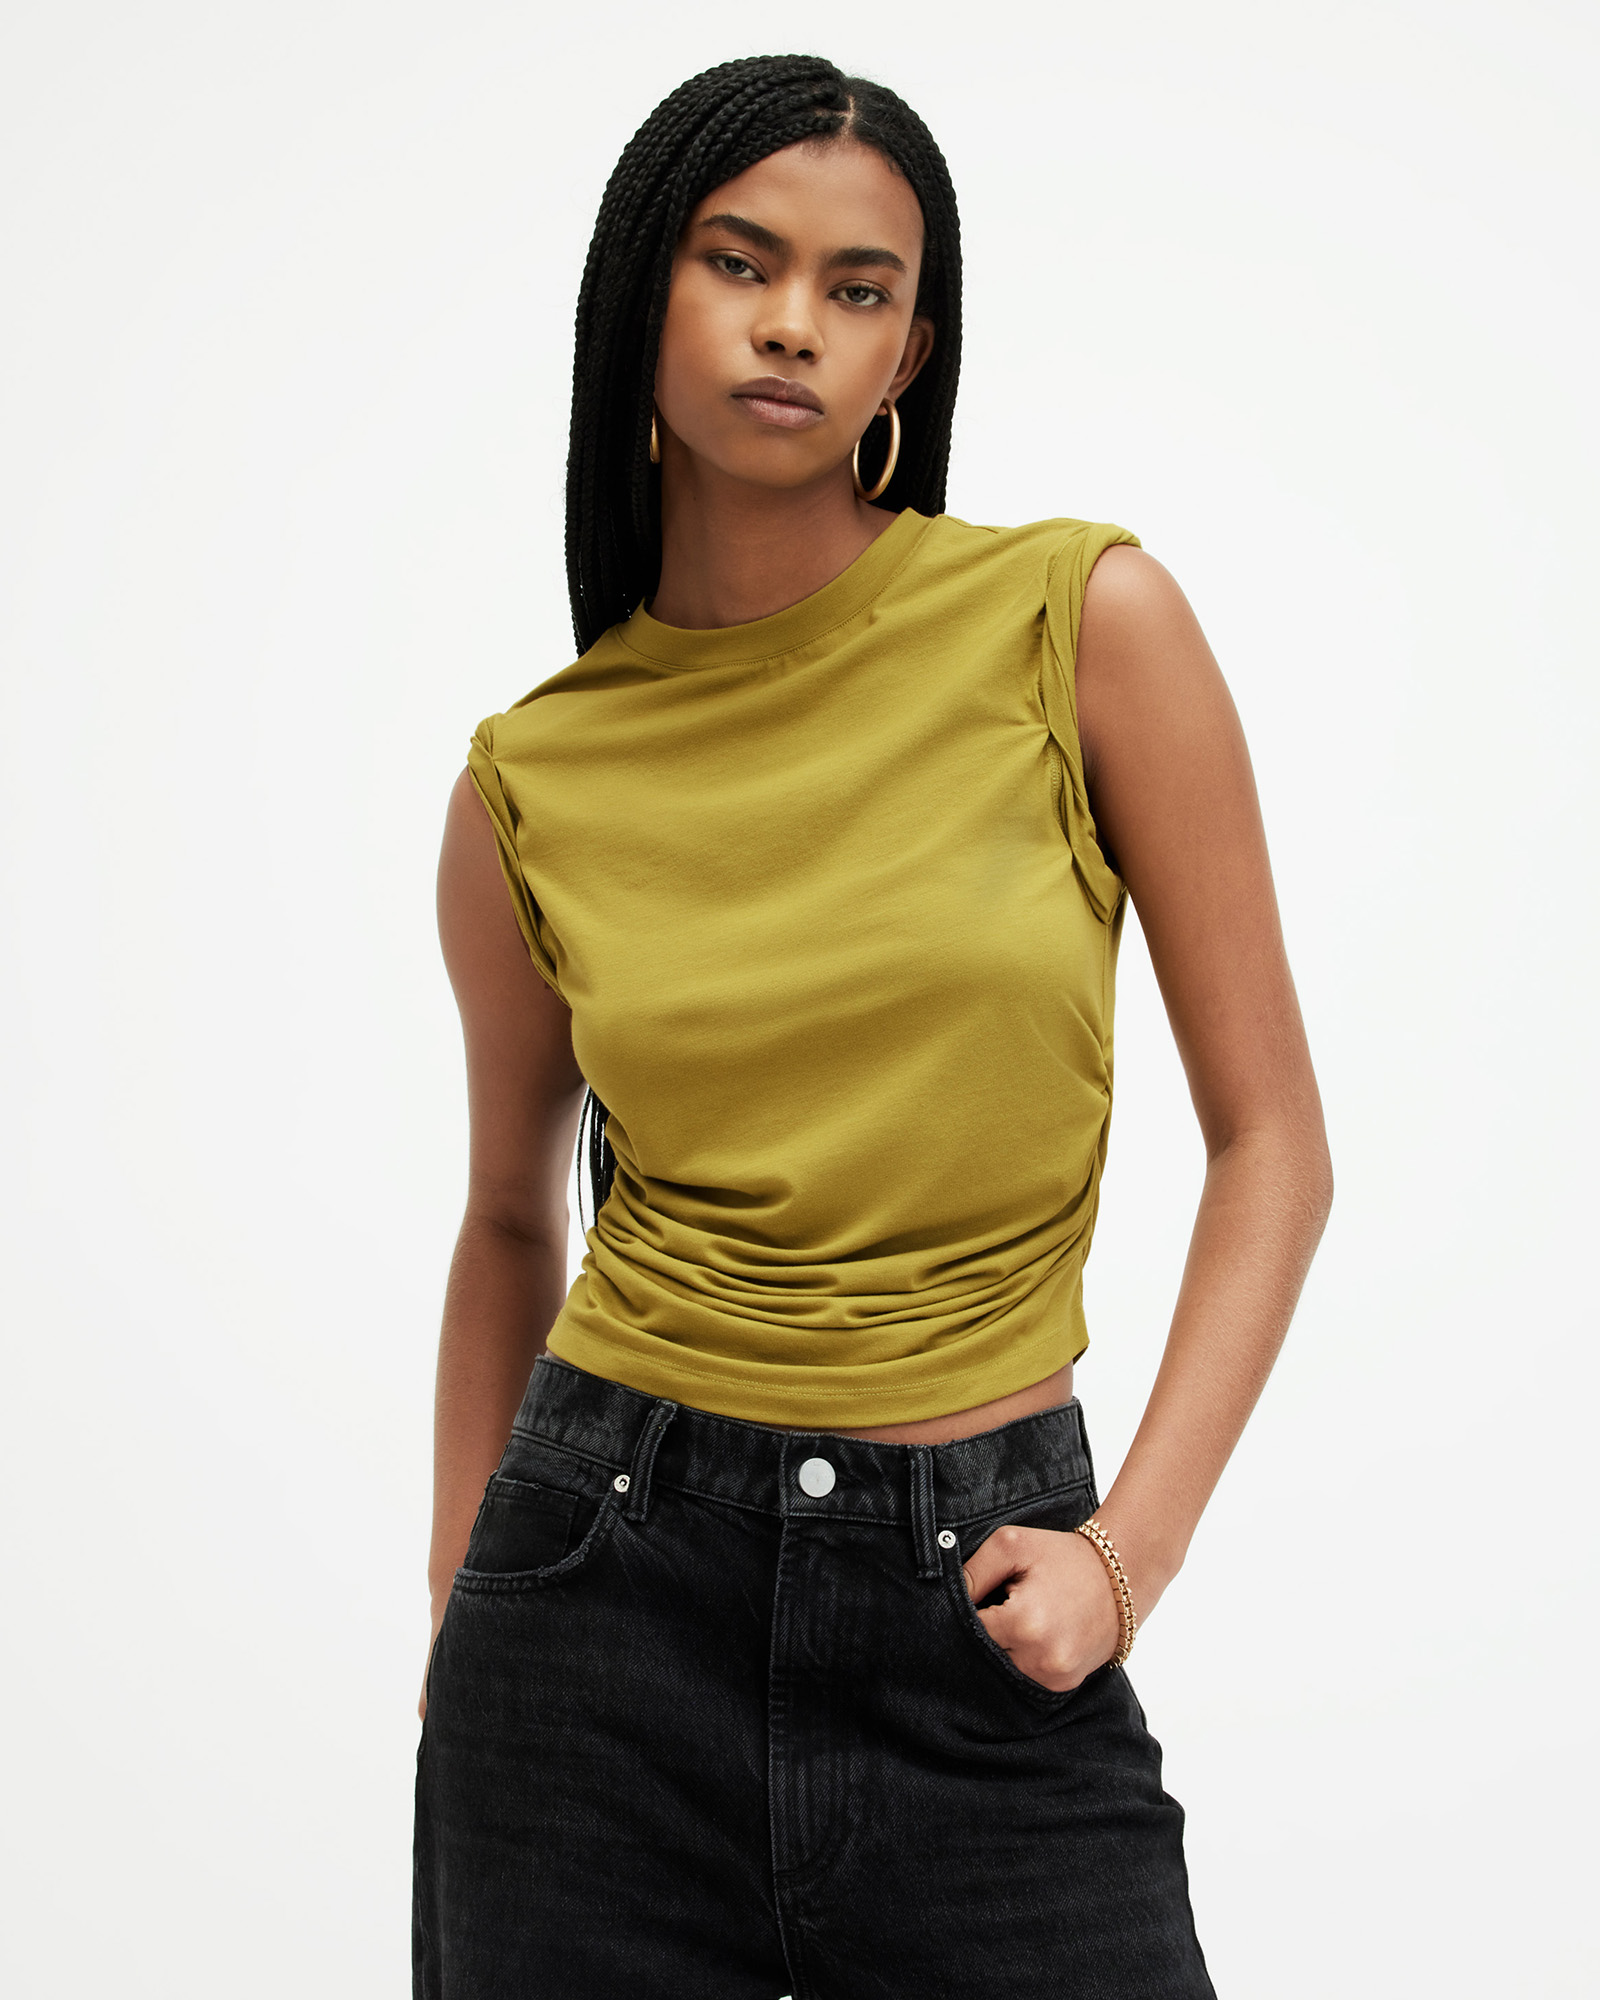 AllSaints West Rolled Sleeve Slim Fit Tank Top,, GOLDEN PALM GREEN, Size: